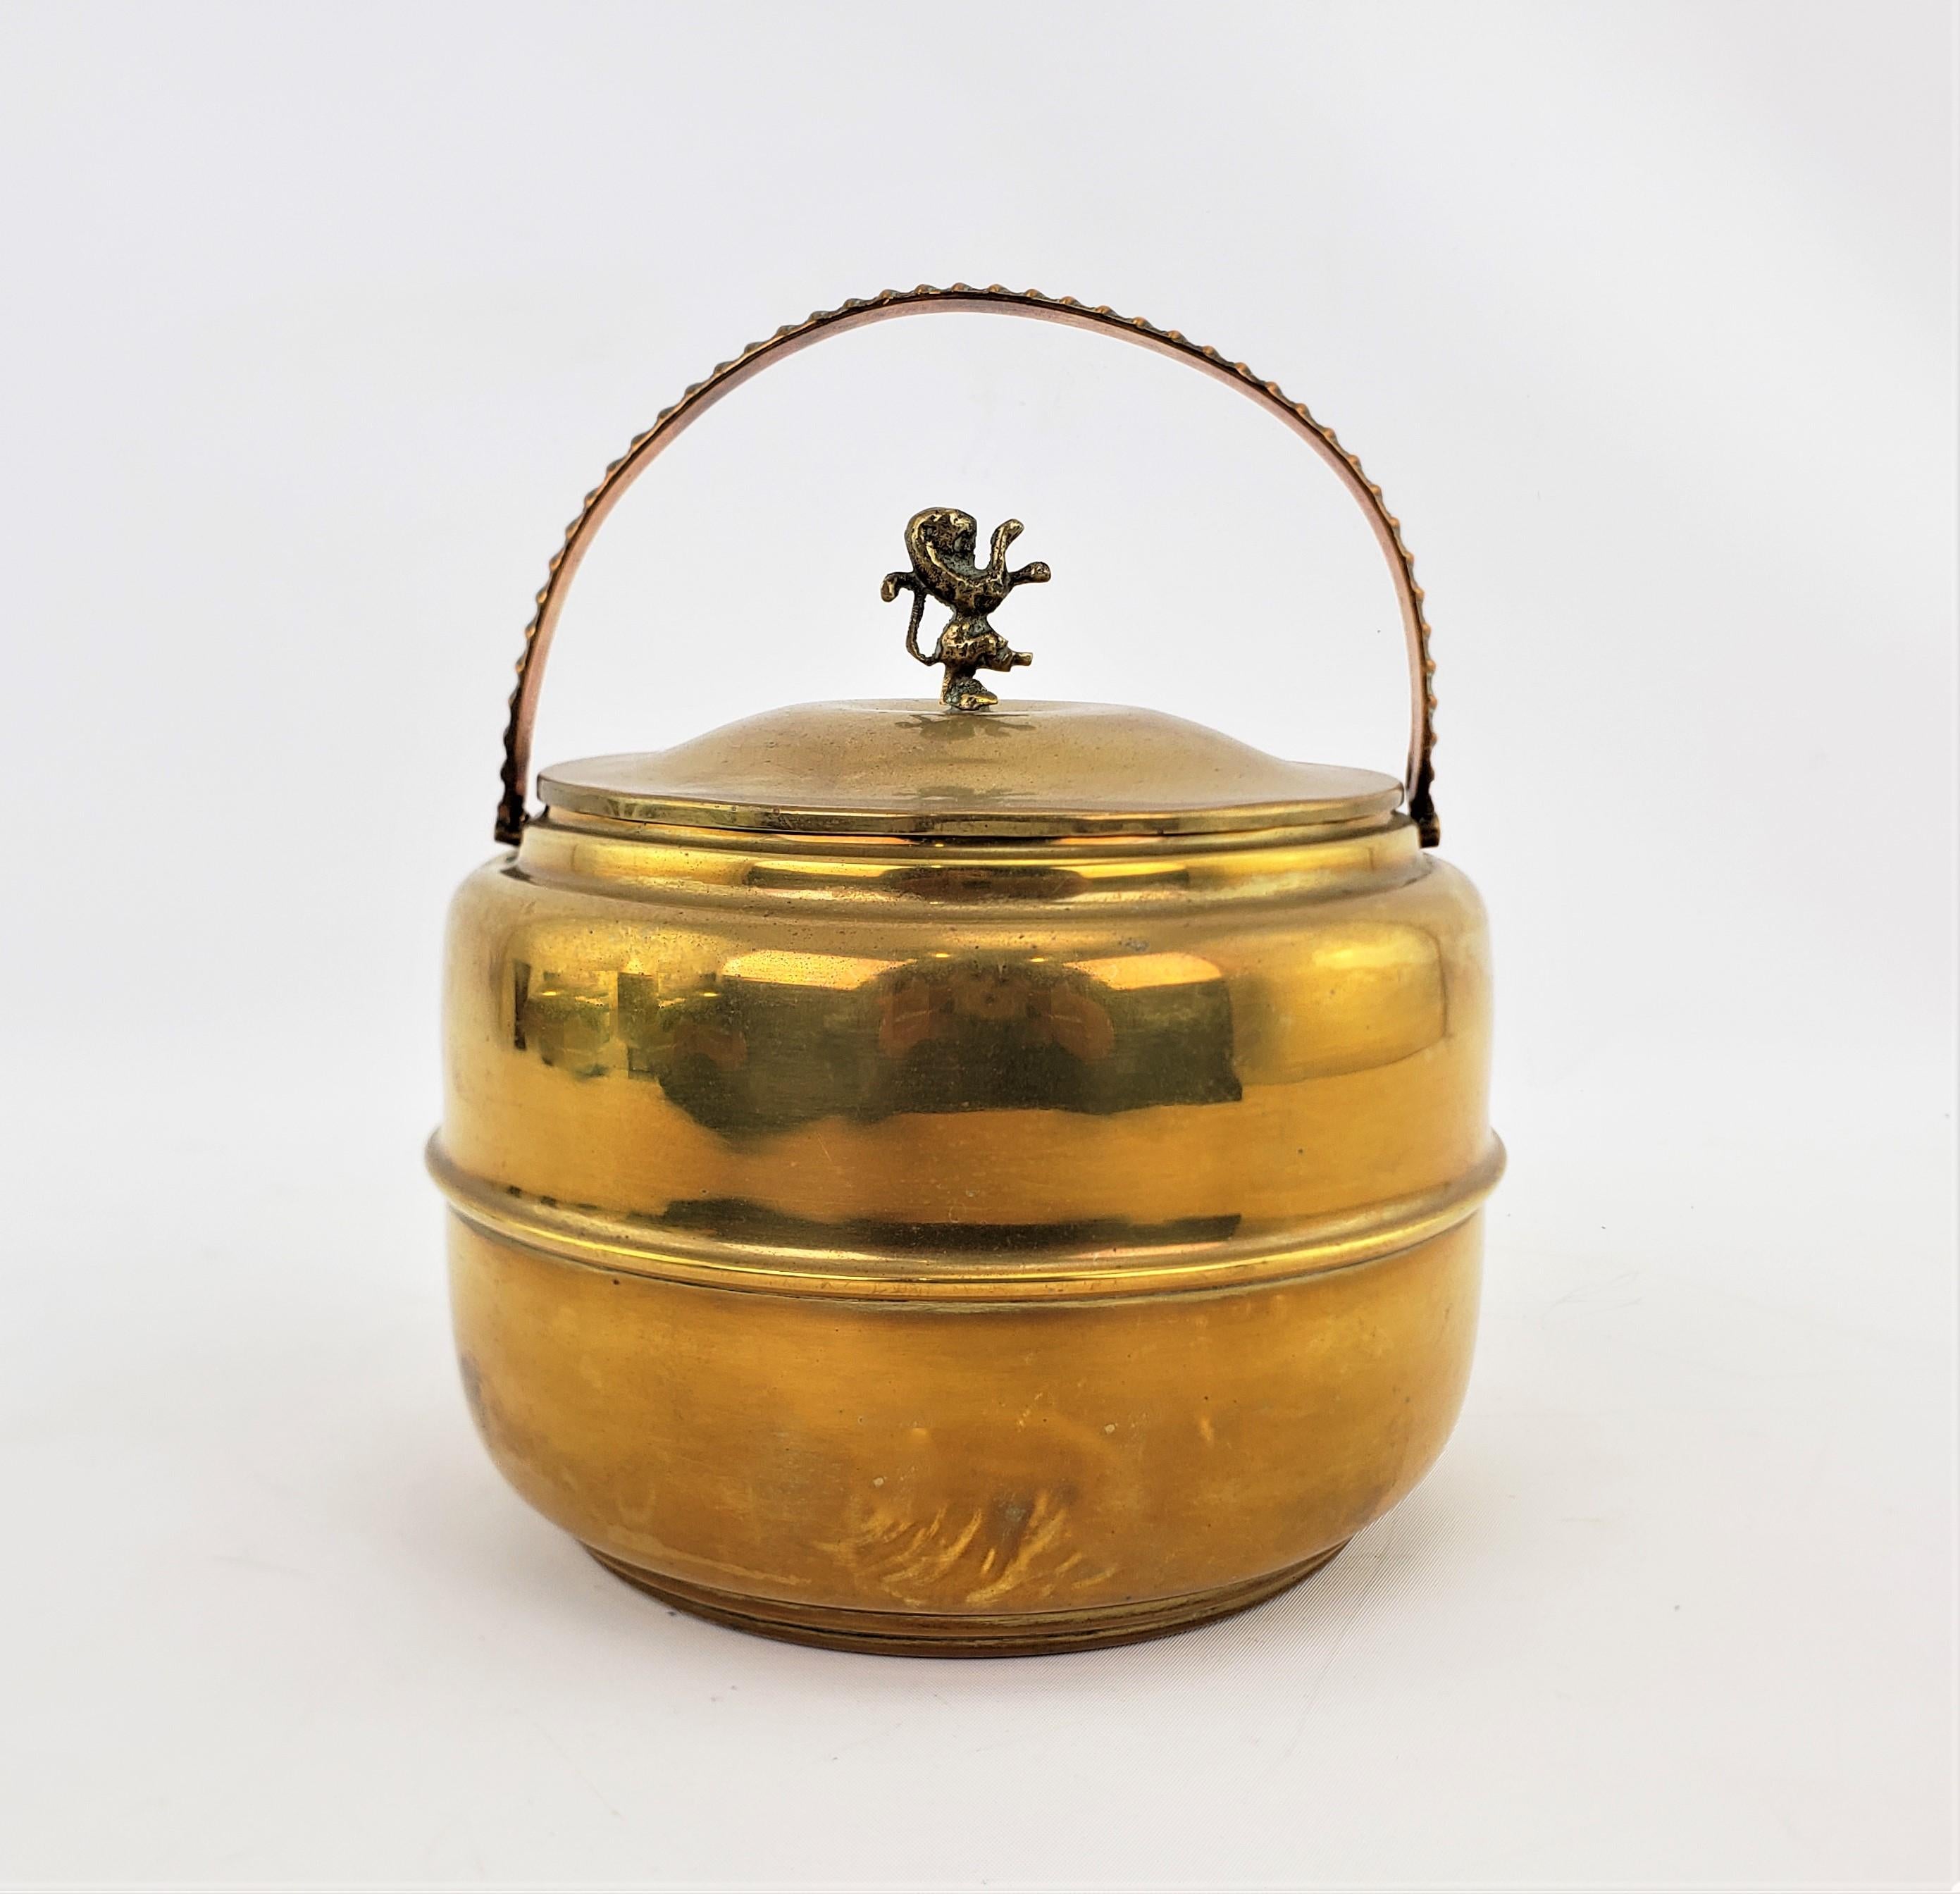 Antique Art Deco English Solid Brass Ice Bucket with Figural Rearing Lion Finial In Good Condition For Sale In Hamilton, Ontario